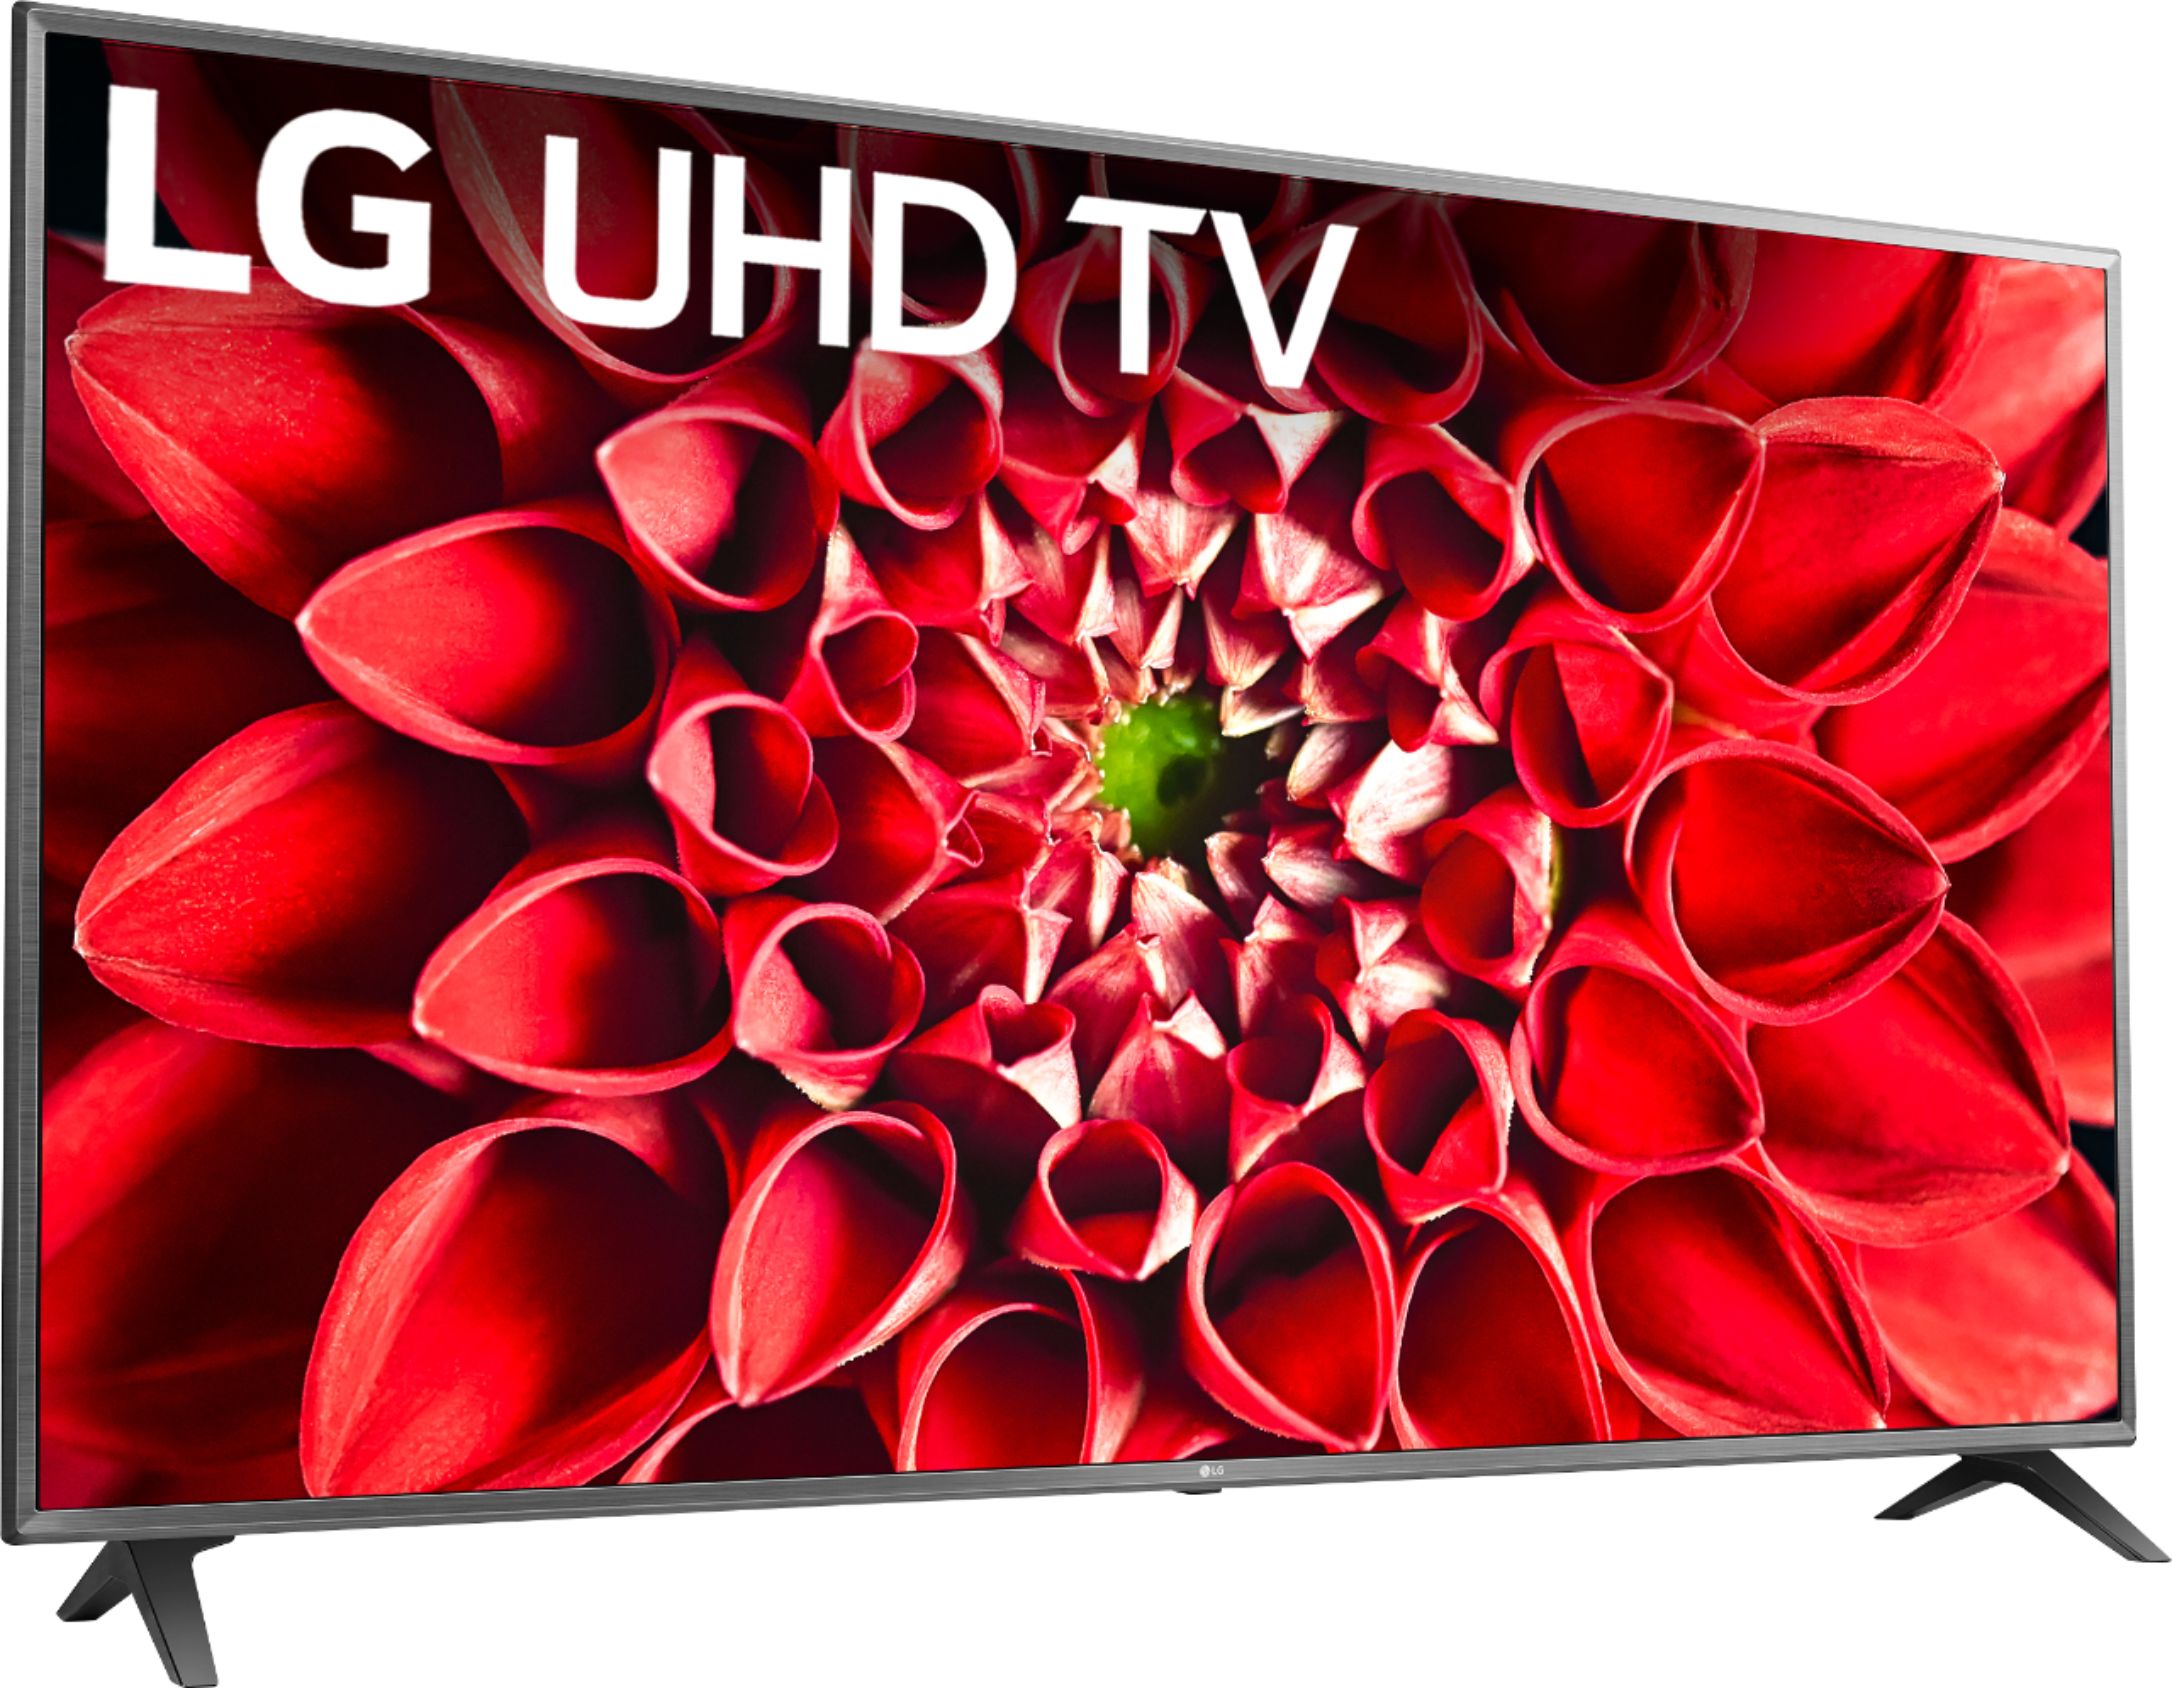 YMMV / LG 75UN7070PUC- 75 inch /4k UHD Smart TV 499.98 (In store only) $499.98